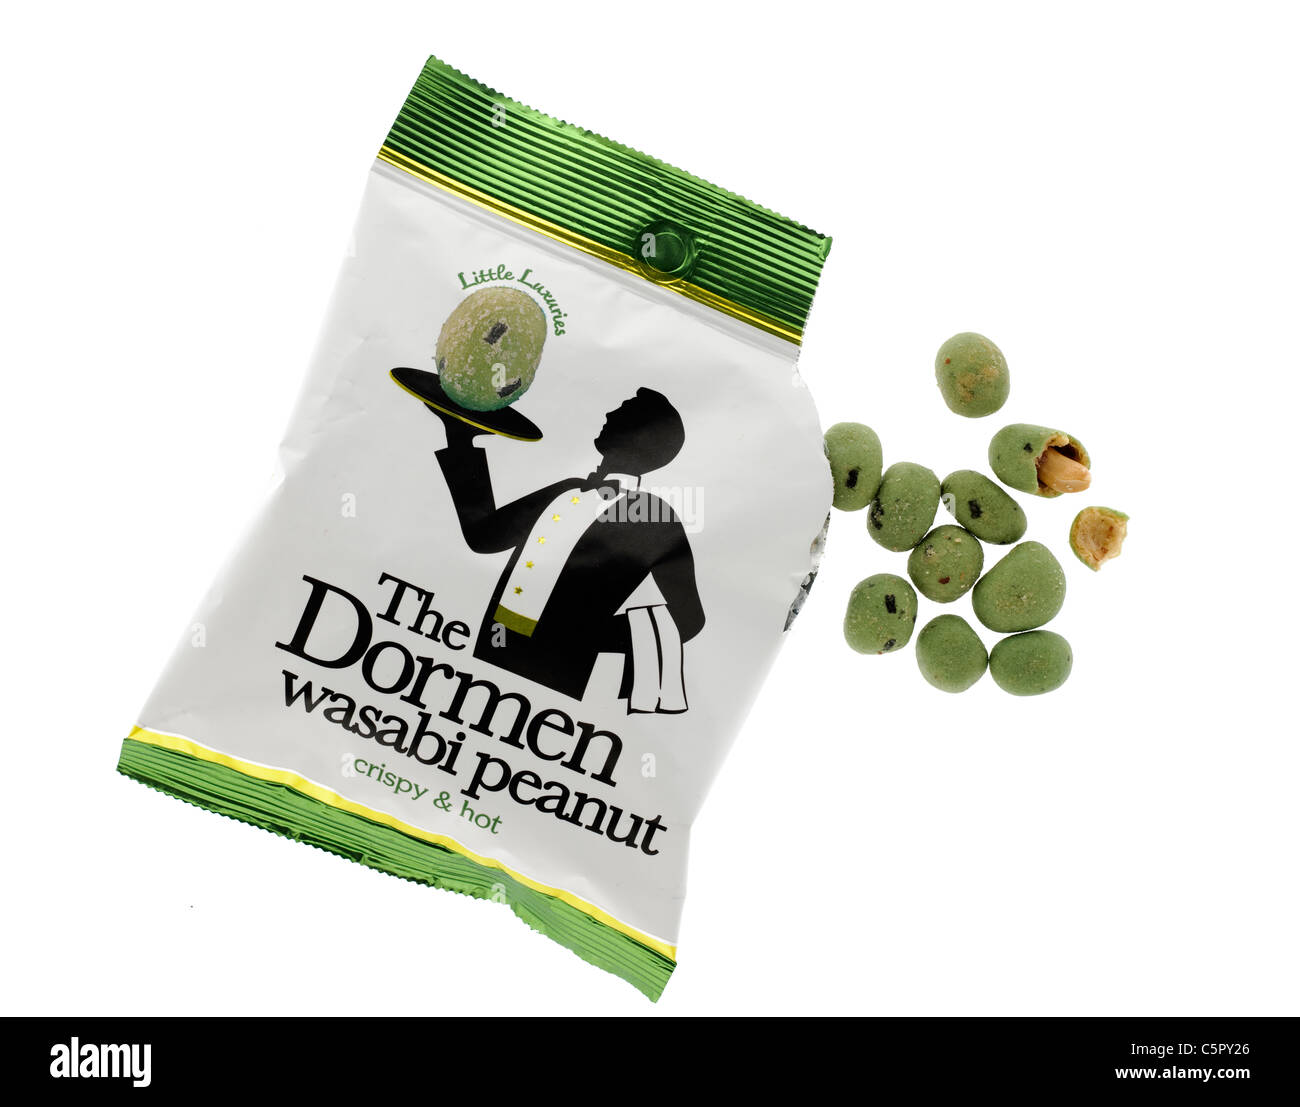 Packet of Little Luxuries The Dormen wasabi peanuts crispy and hot. Stock Photo